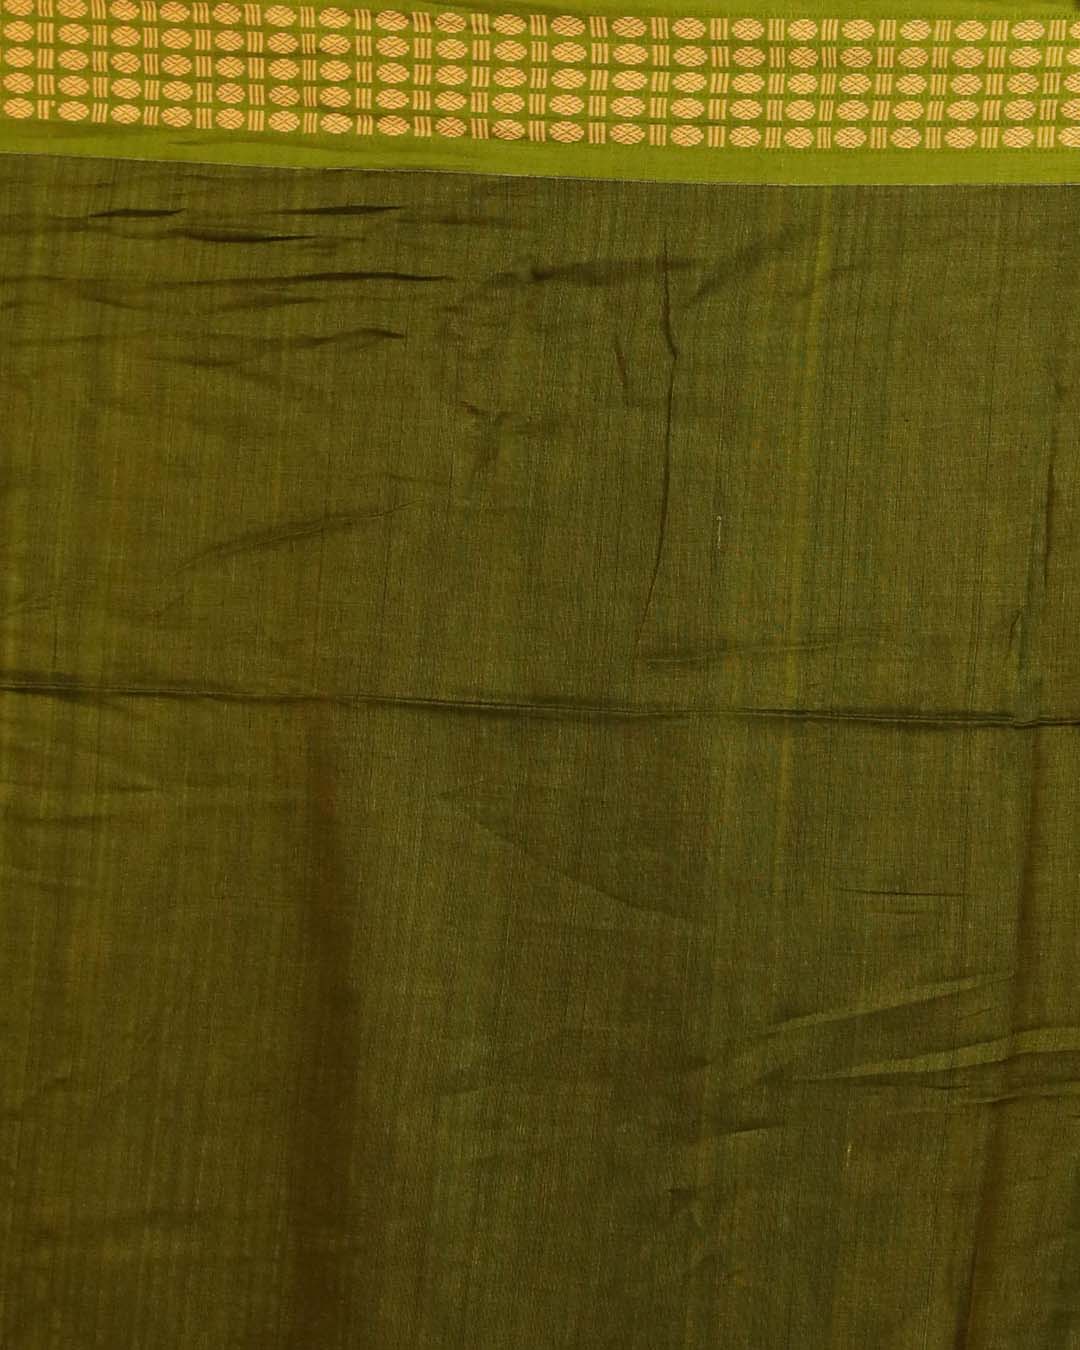 Indethnic Green Woven Design Traditional Wear - Saree Detail View